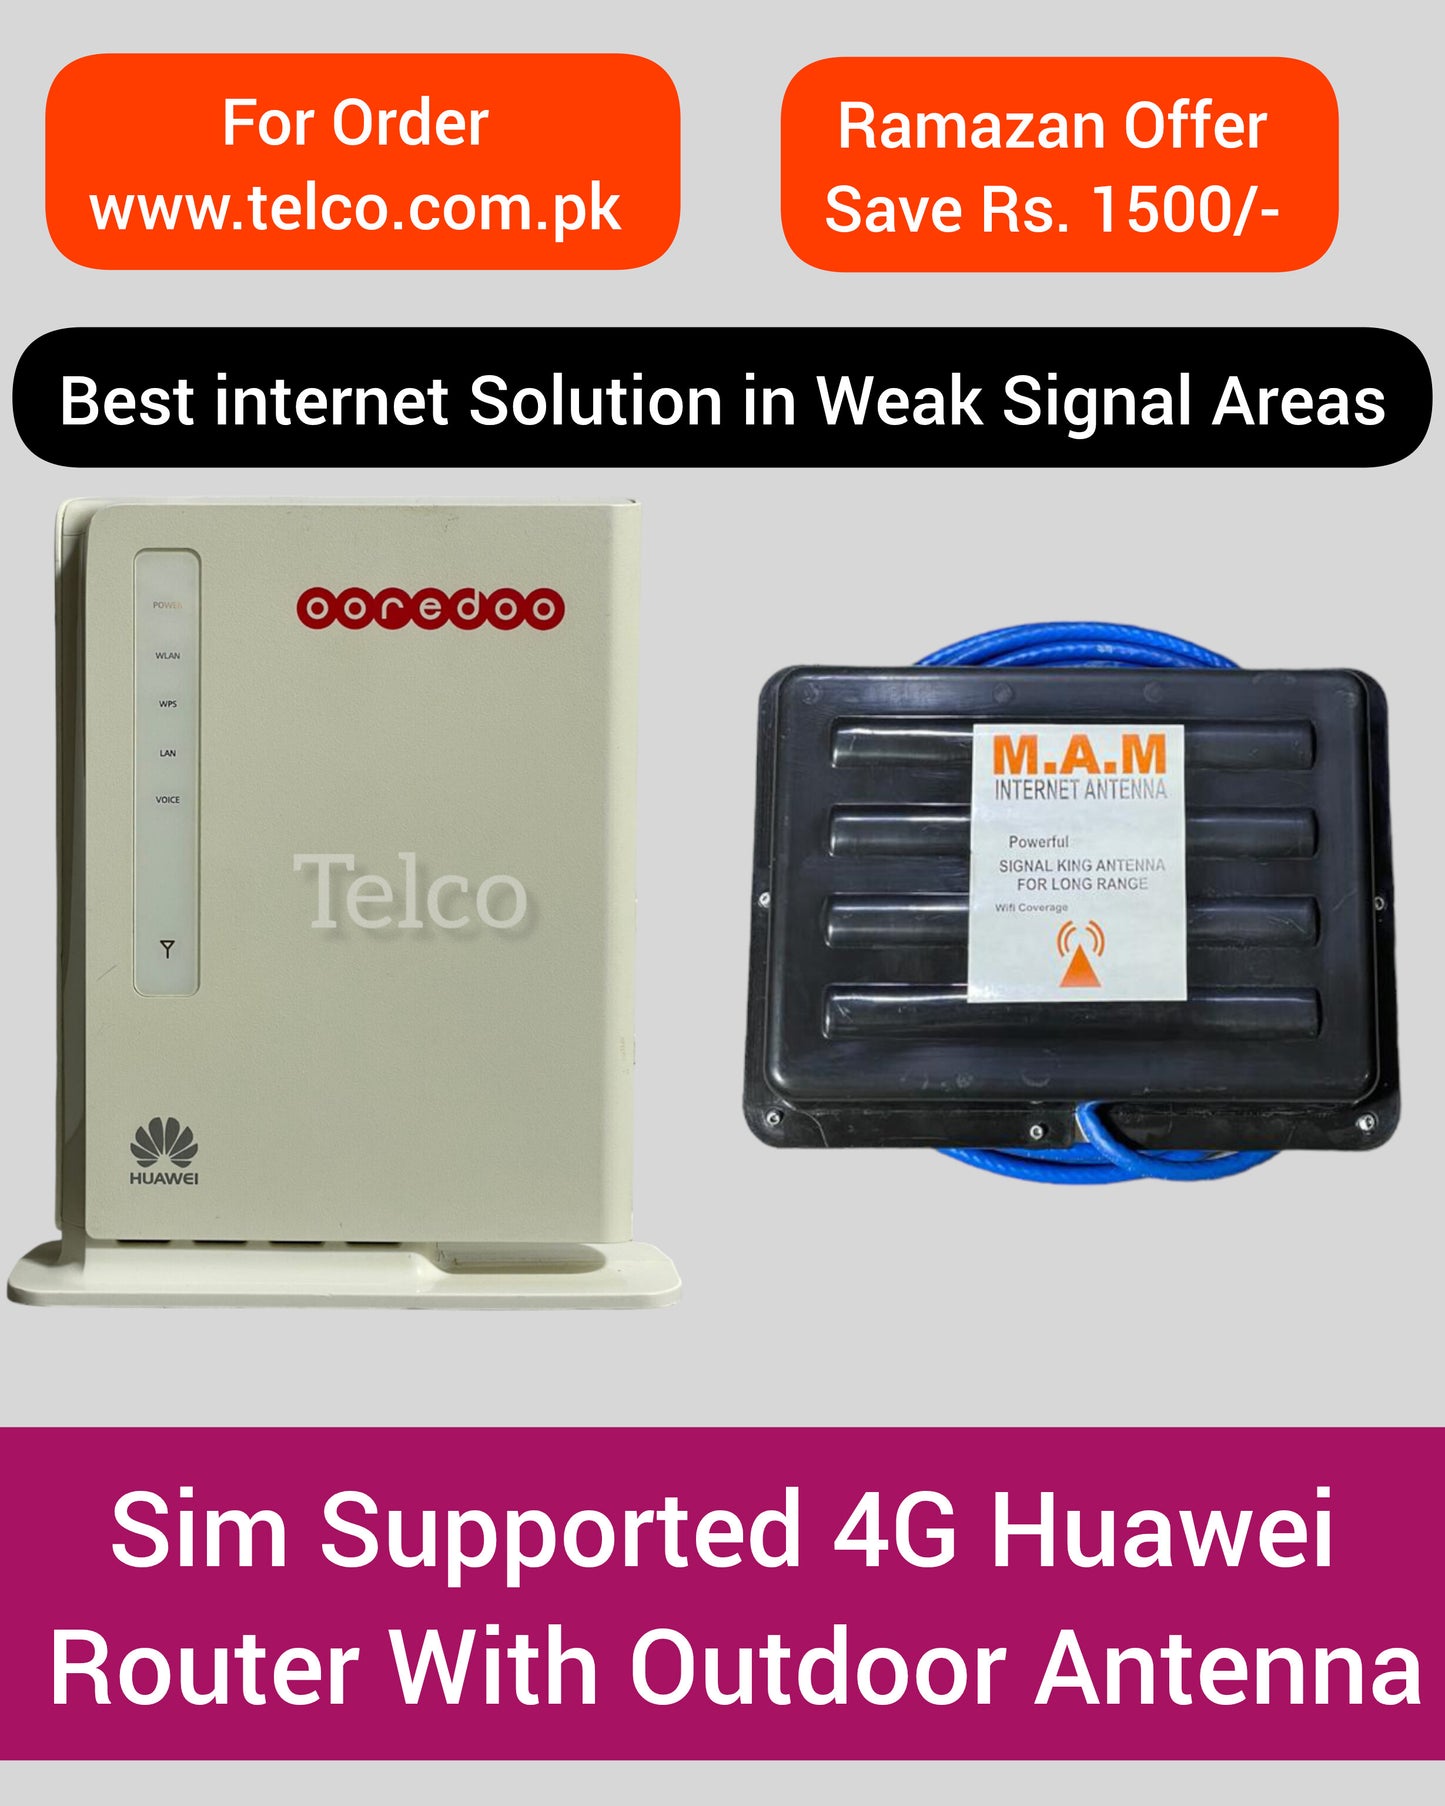 Huawei 4G Router with Outdoor Antenna